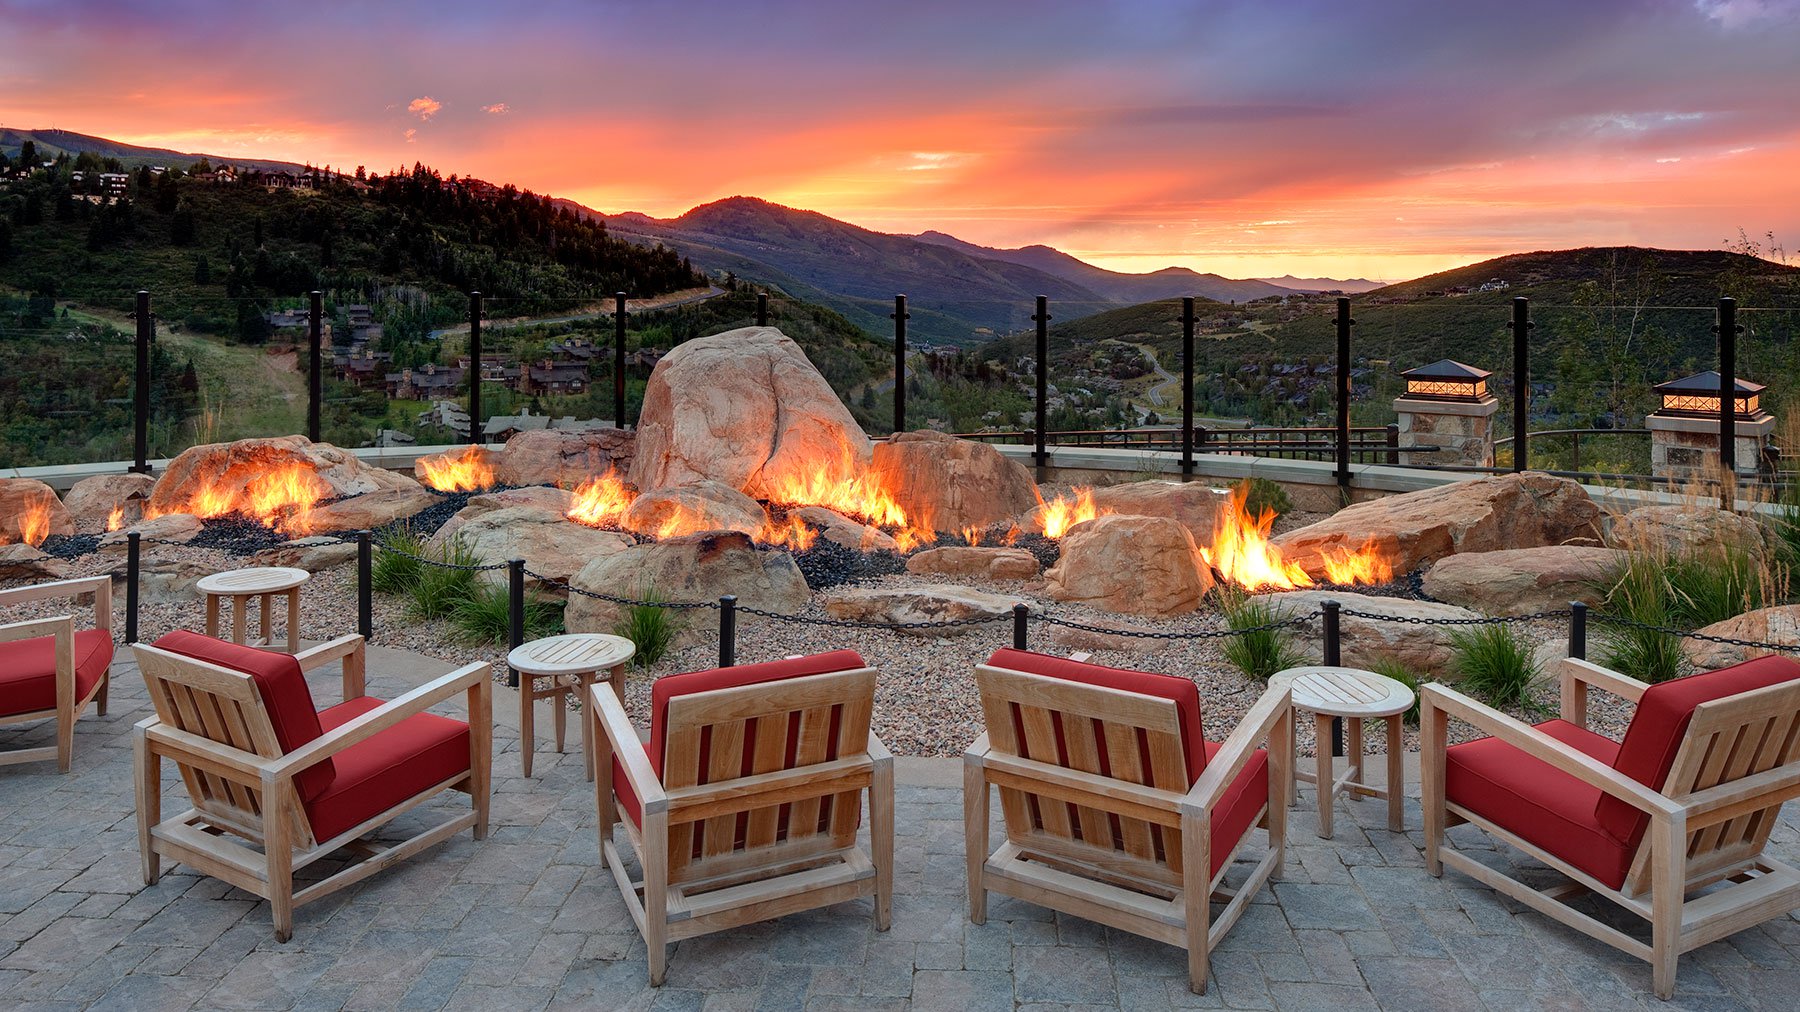 St. Regis Deer Valley Patio with Fireplace at Sunset